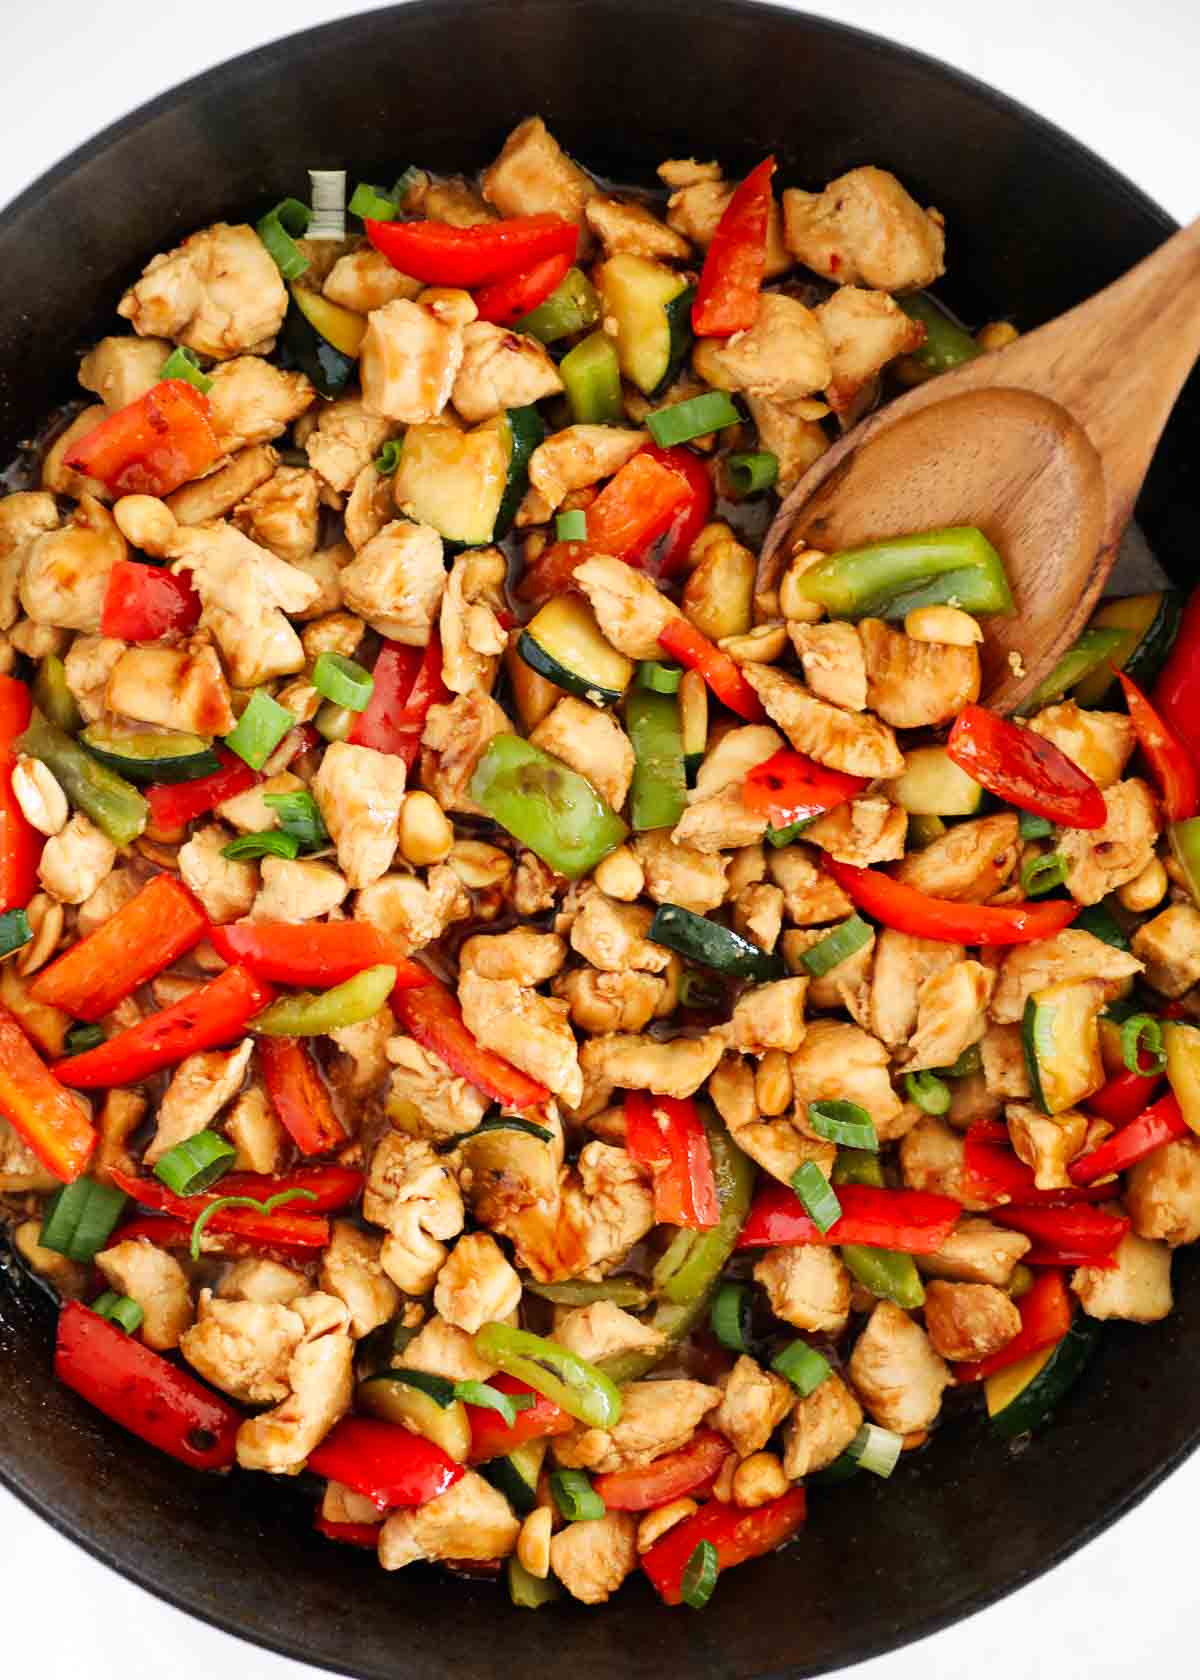 Panda Express Kung Pao Chicken in a black skillet.